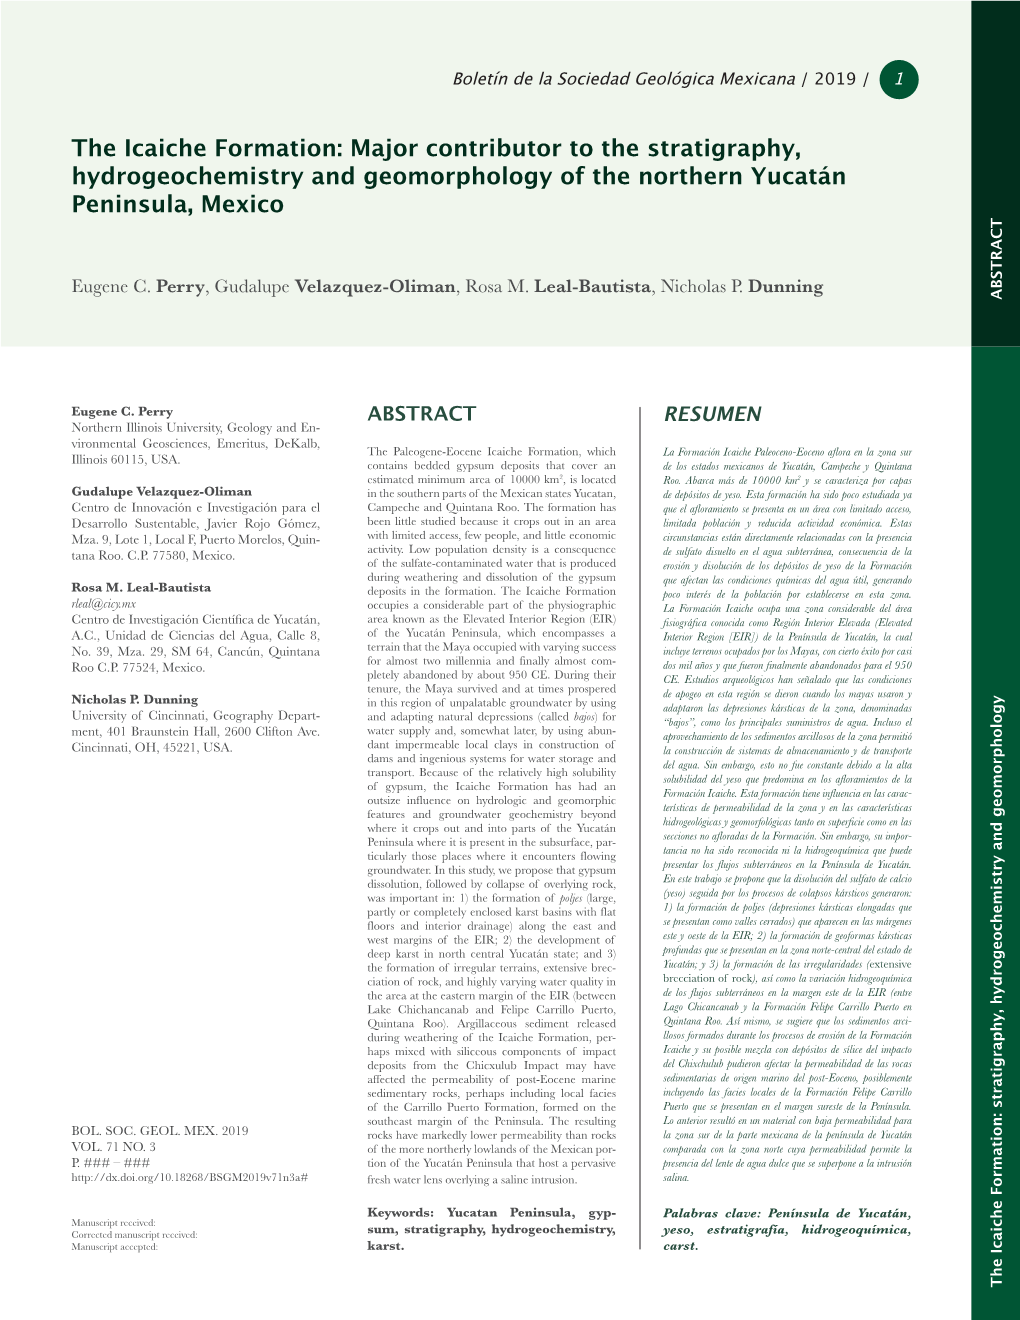 The Icaiche Formation, Per During Weathering of Quintana Roo)